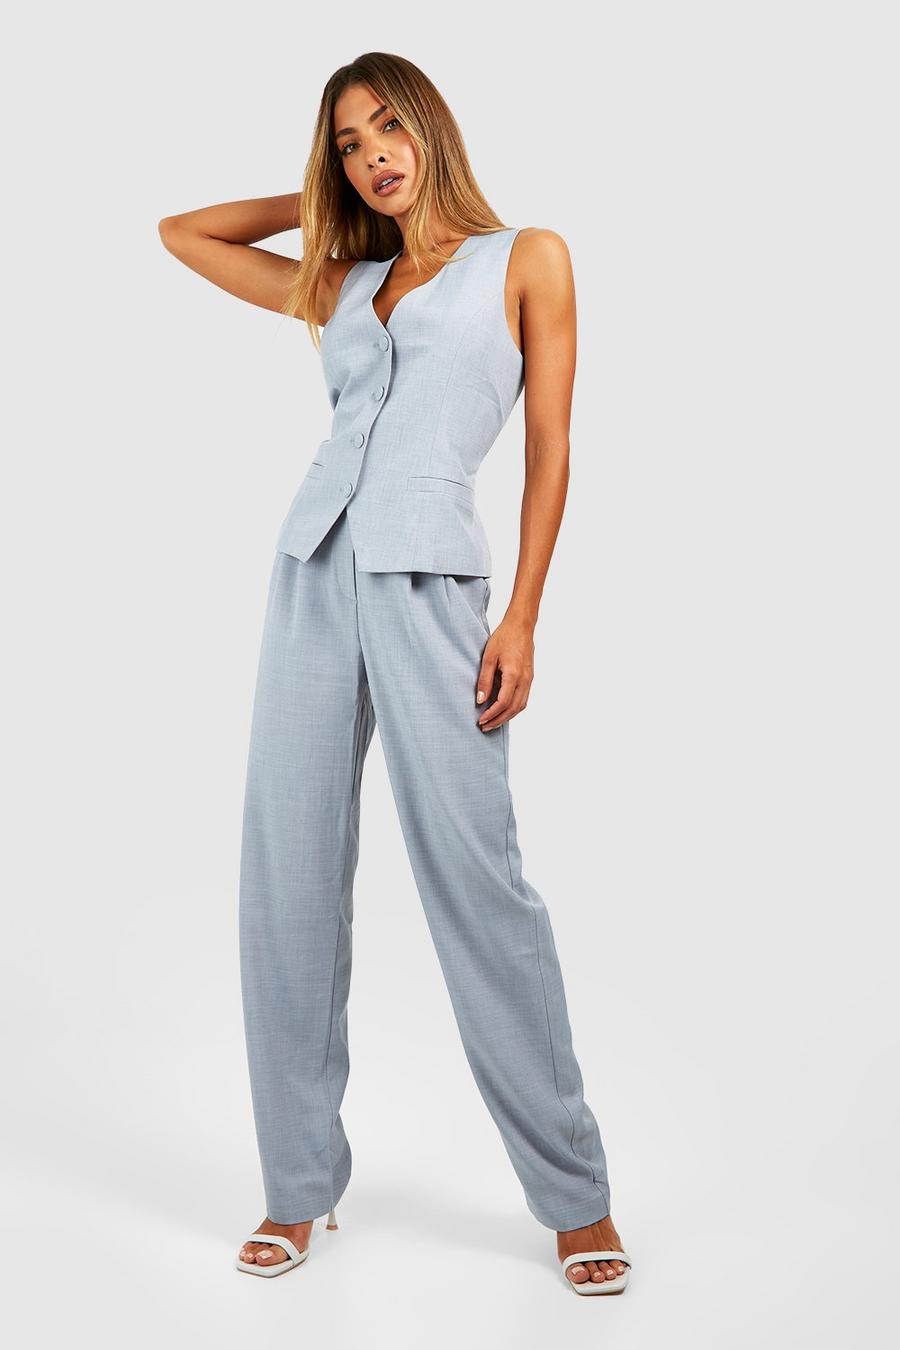 Grey Marl Pleat Front Straight Leg Trousers image number 1